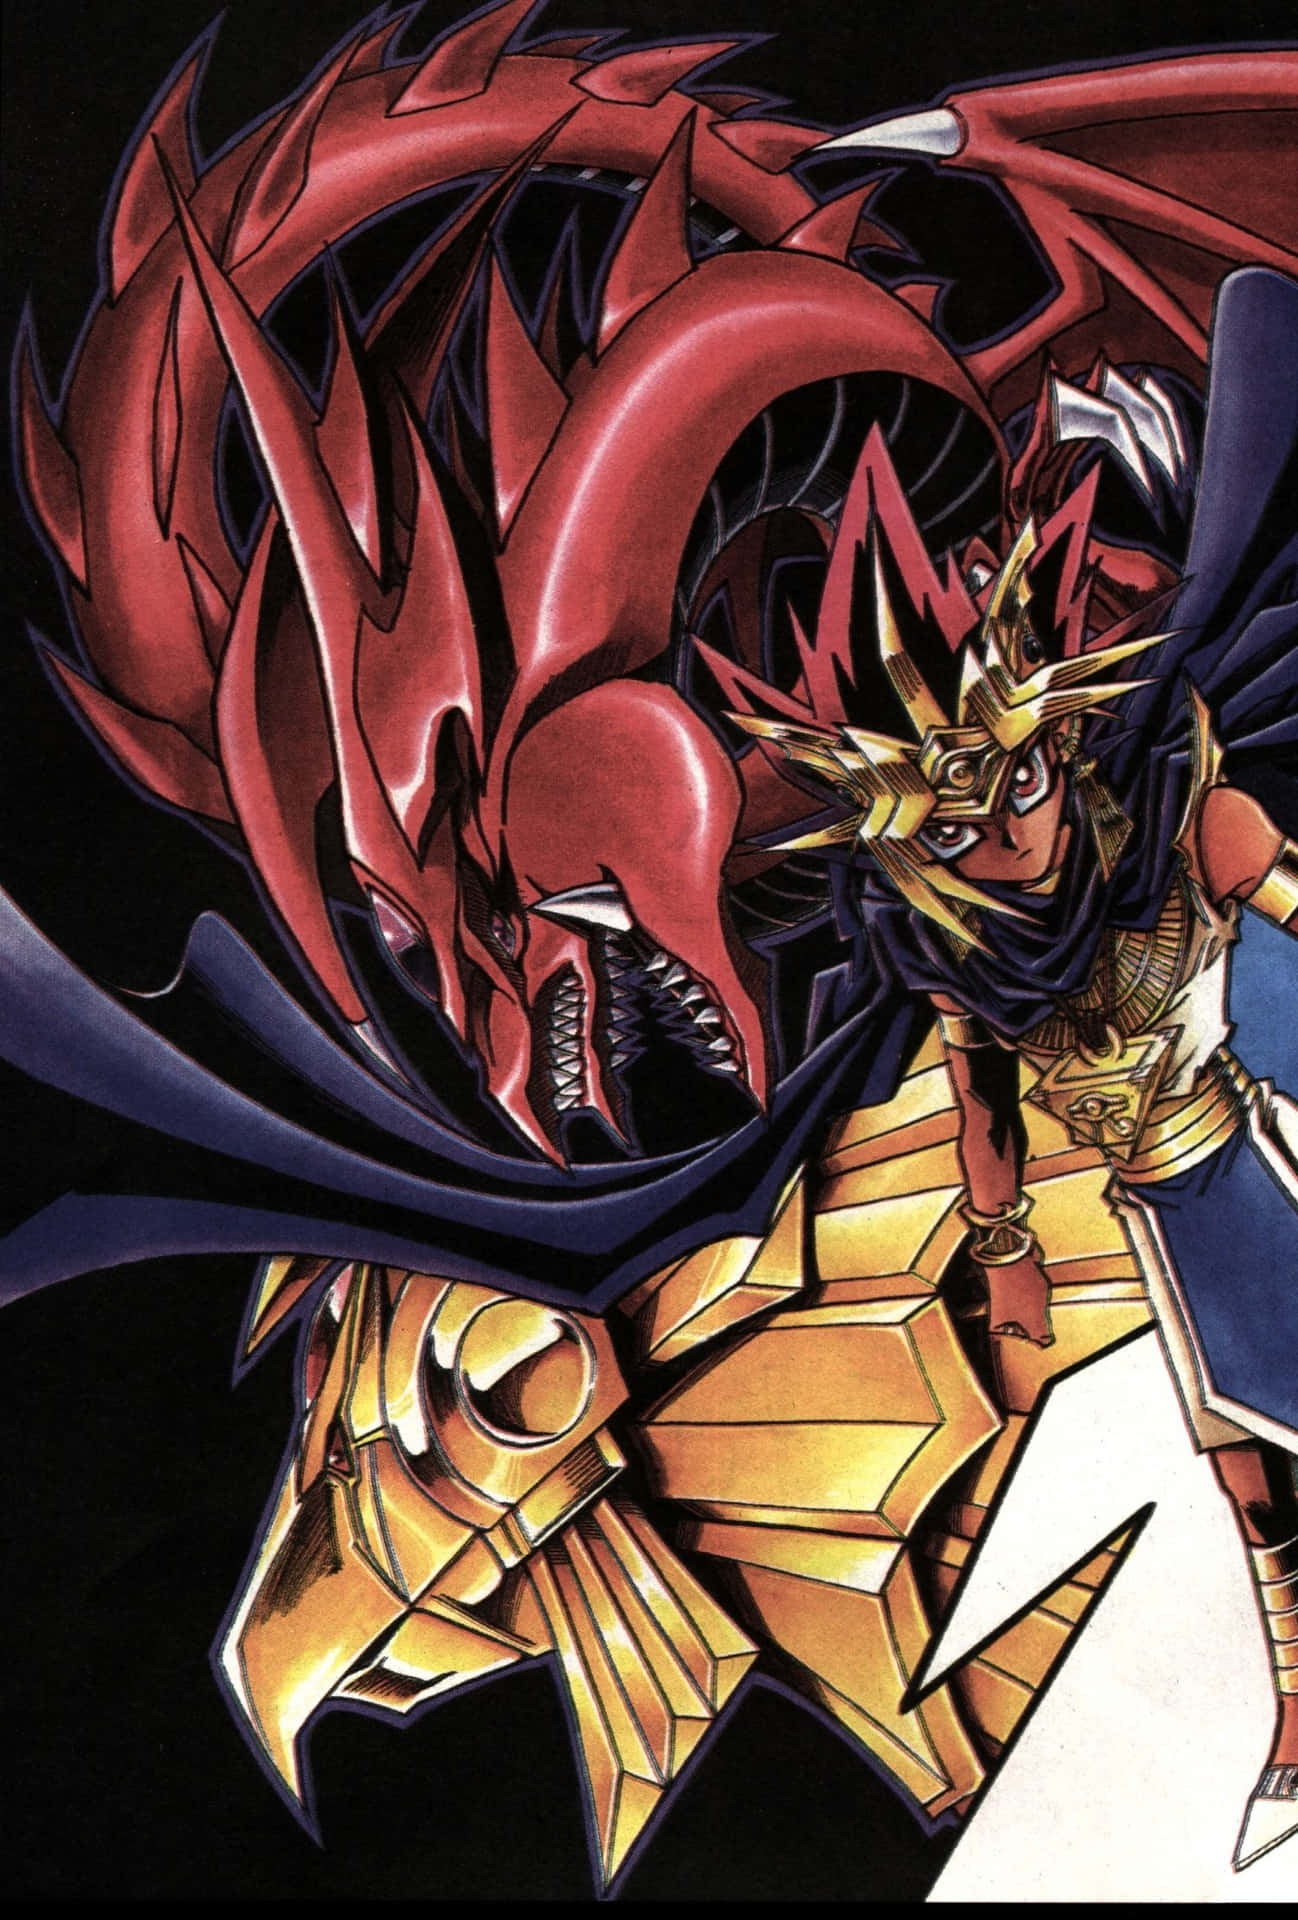 The Winged Dragon of Ra in an epic battle Wallpaper